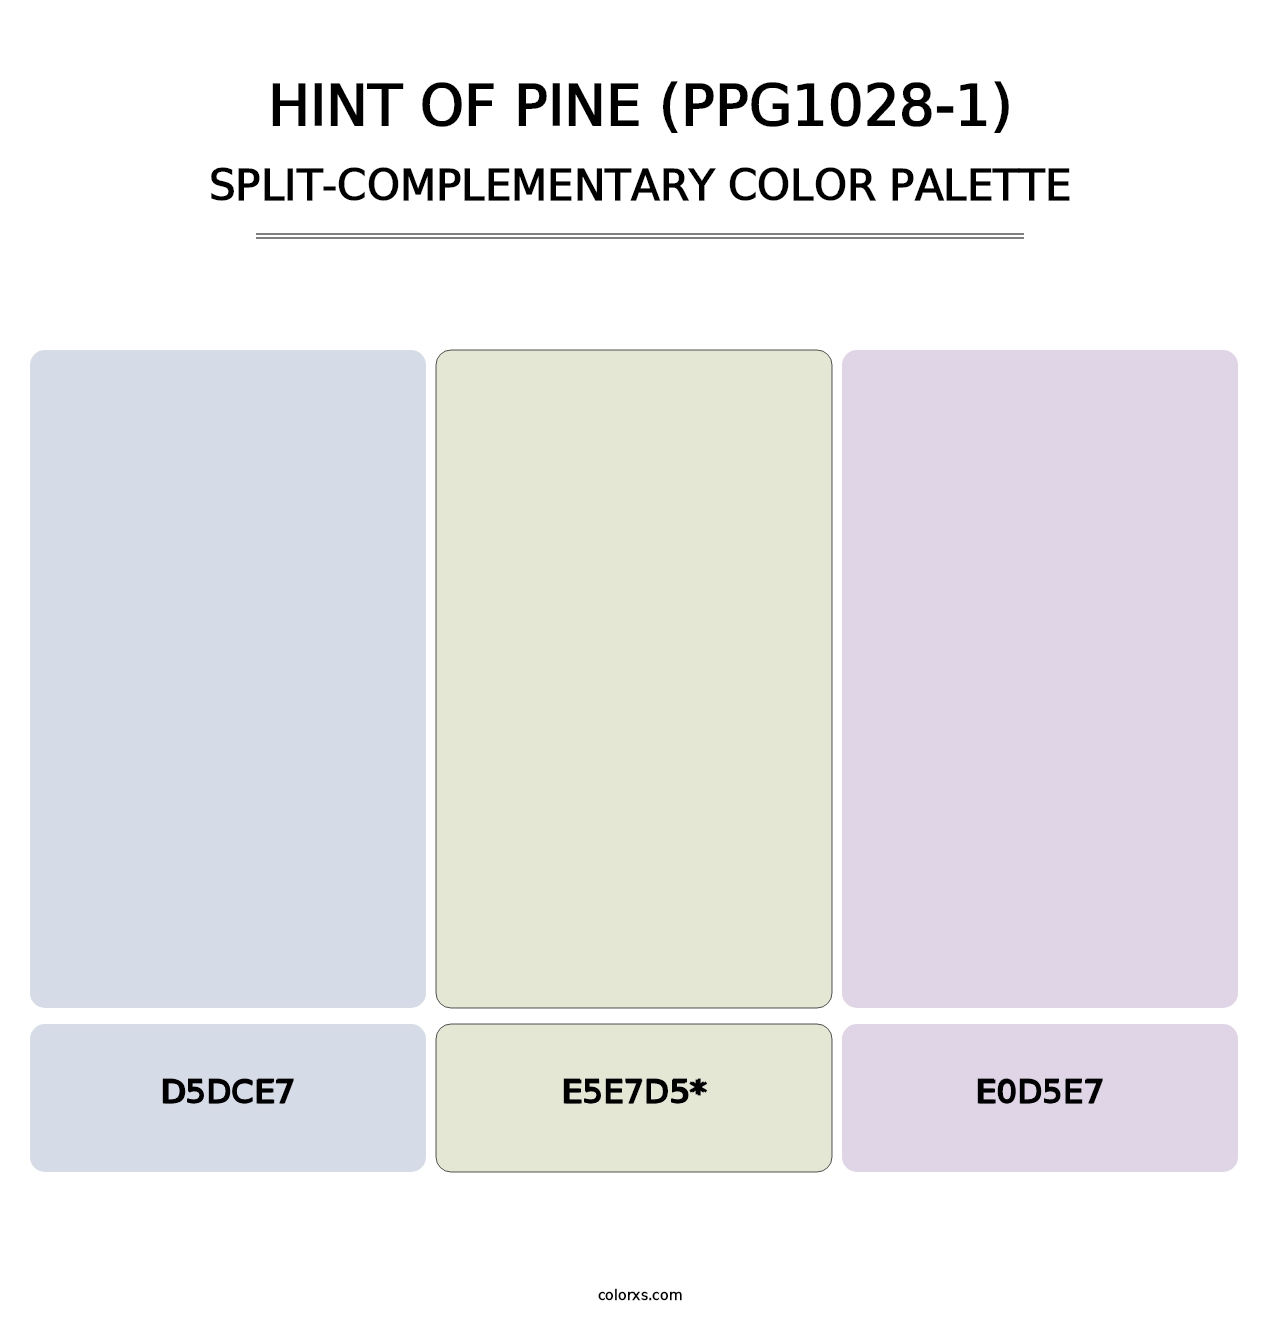 Hint Of Pine (PPG1028-1) - Split-Complementary Color Palette